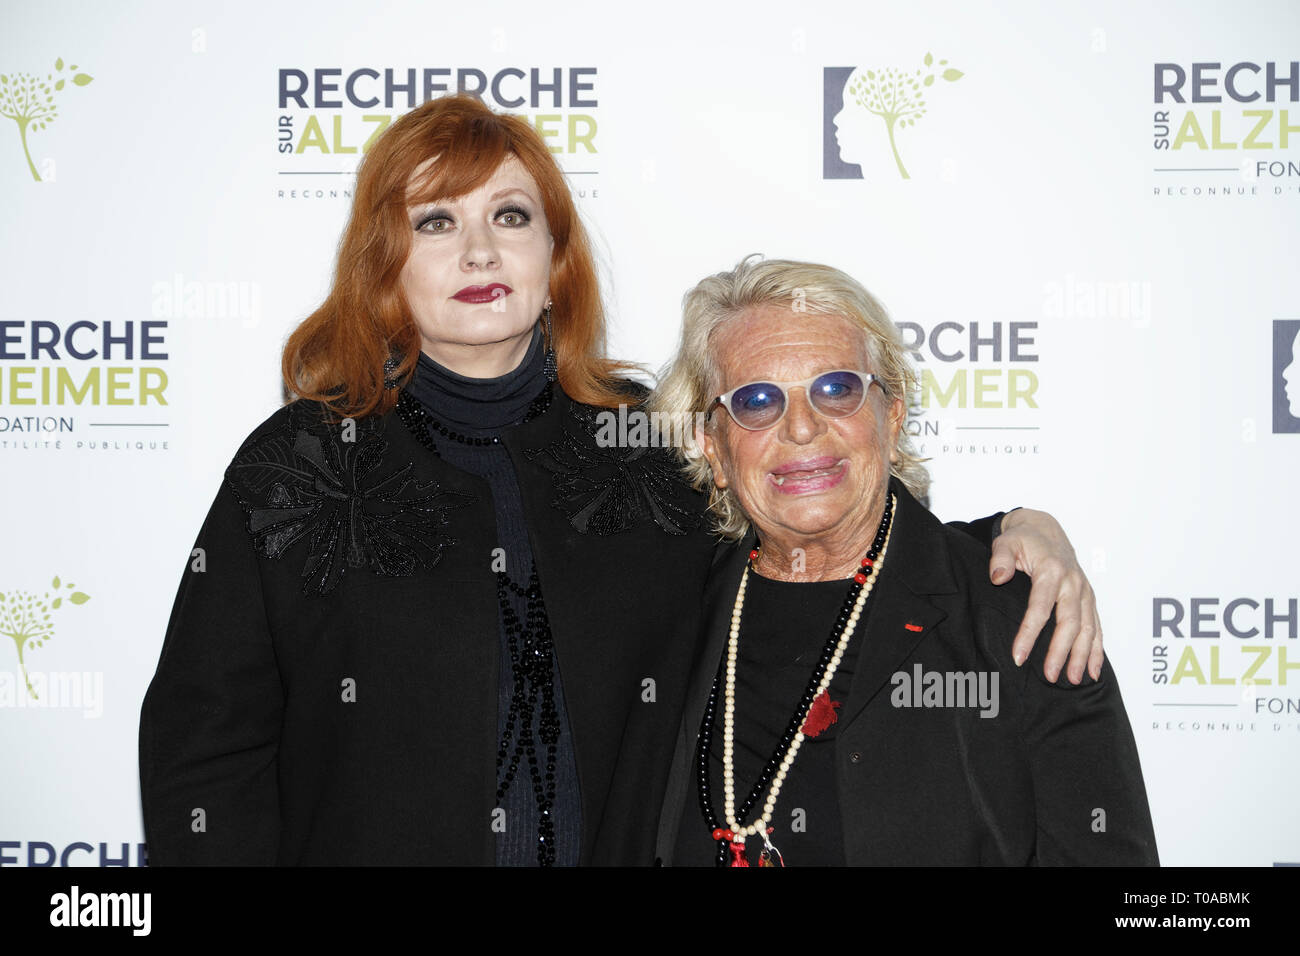 Paris, France. 18th Mar 2019. Catherine Jacob (L) and Veronique de Villele (R) - Photocall of the 14th Gala 2019 of the Association for Alzheimer Research at the Olympia in Paris on March 18, 2019 Credit: Véronique PHITOUSSI/Alamy Live News Stock Photo